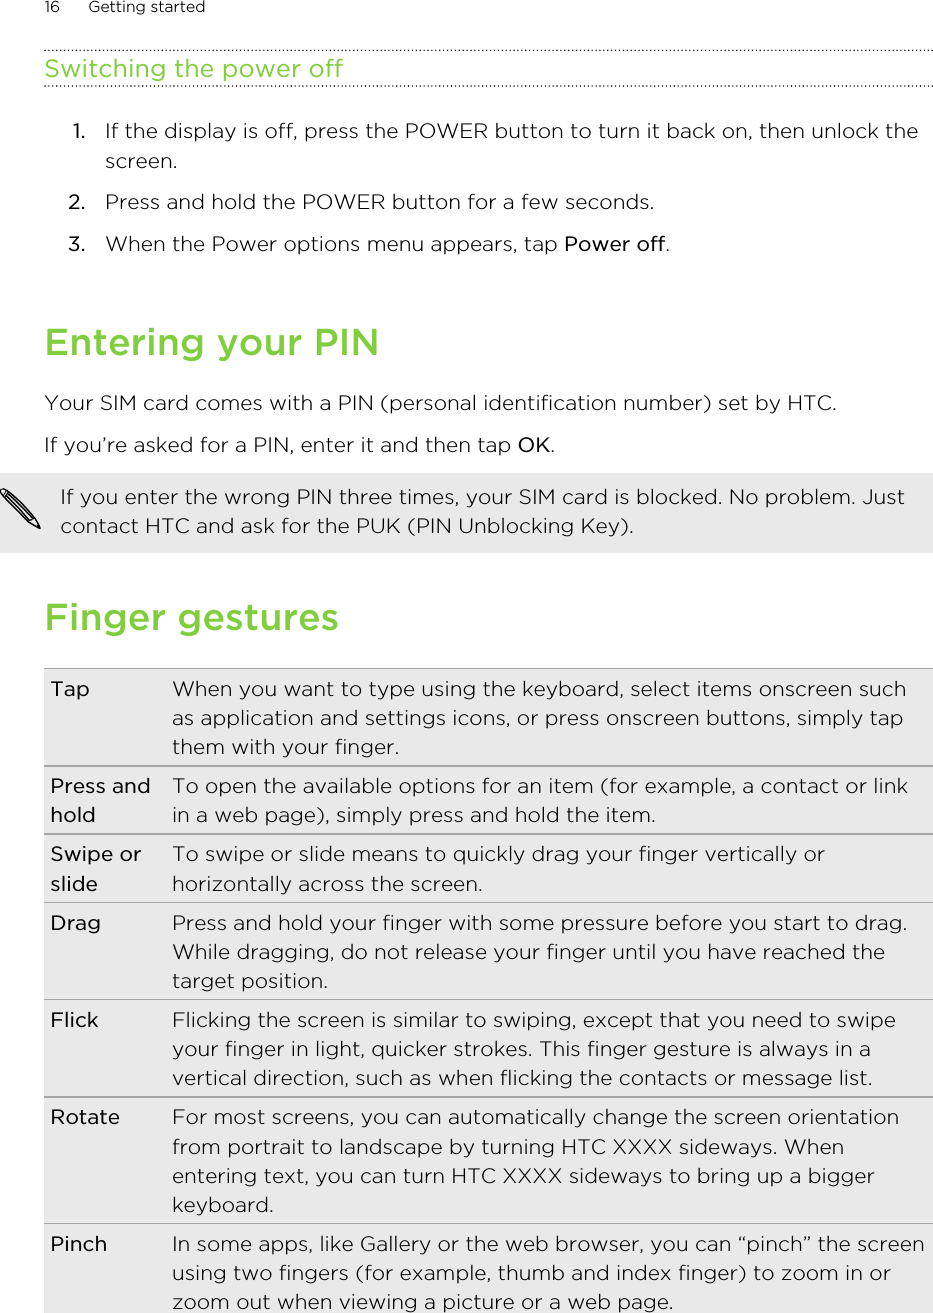 Switching the power off1. If the display is off, press the POWER button to turn it back on, then unlock thescreen.2. Press and hold the POWER button for a few seconds.3. When the Power options menu appears, tap Power off.Entering your PINYour SIM card comes with a PIN (personal identification number) set by HTC.If you’re asked for a PIN, enter it and then tap OK. If you enter the wrong PIN three times, your SIM card is blocked. No problem. Justcontact HTC and ask for the PUK (PIN Unblocking Key).Finger gesturesTap When you want to type using the keyboard, select items onscreen suchas application and settings icons, or press onscreen buttons, simply tapthem with your finger.Press andholdTo open the available options for an item (for example, a contact or linkin a web page), simply press and hold the item.Swipe orslideTo swipe or slide means to quickly drag your finger vertically orhorizontally across the screen.Drag Press and hold your finger with some pressure before you start to drag.While dragging, do not release your finger until you have reached thetarget position.Flick Flicking the screen is similar to swiping, except that you need to swipeyour finger in light, quicker strokes. This finger gesture is always in avertical direction, such as when flicking the contacts or message list.Rotate For most screens, you can automatically change the screen orientationfrom portrait to landscape by turning HTC XXXX sideways. Whenentering text, you can turn HTC XXXX sideways to bring up a biggerkeyboard.Pinch In some apps, like Gallery or the web browser, you can “pinch” the screenusing two fingers (for example, thumb and index finger) to zoom in orzoom out when viewing a picture or a web page.16 Getting started